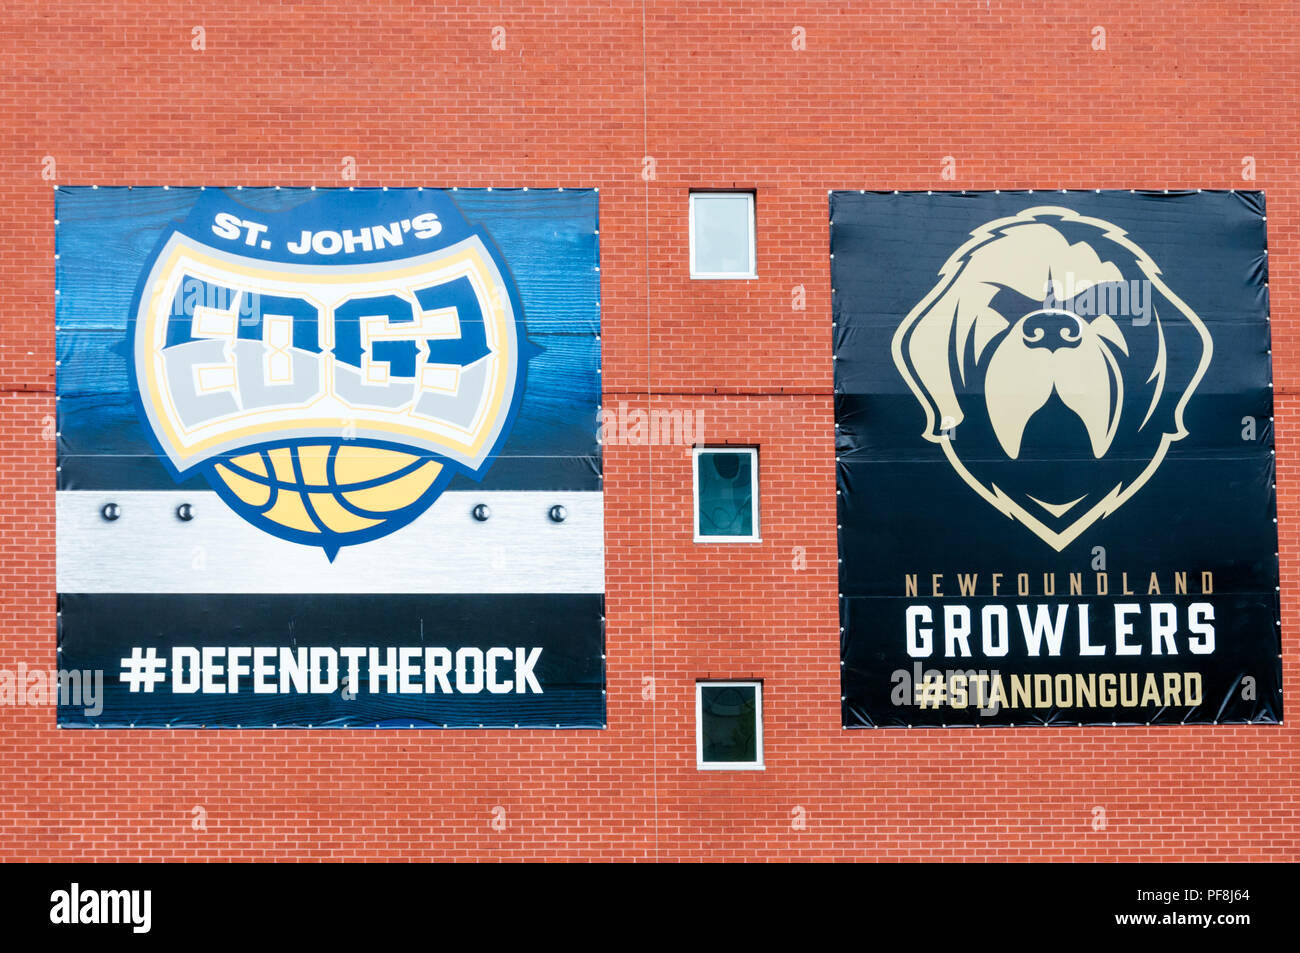 Banners for the St John's Edge basketball team and Newfoundland Growlers ice hockey team at the Mile One Centre, Newfoundland, Canada. Stock Photo